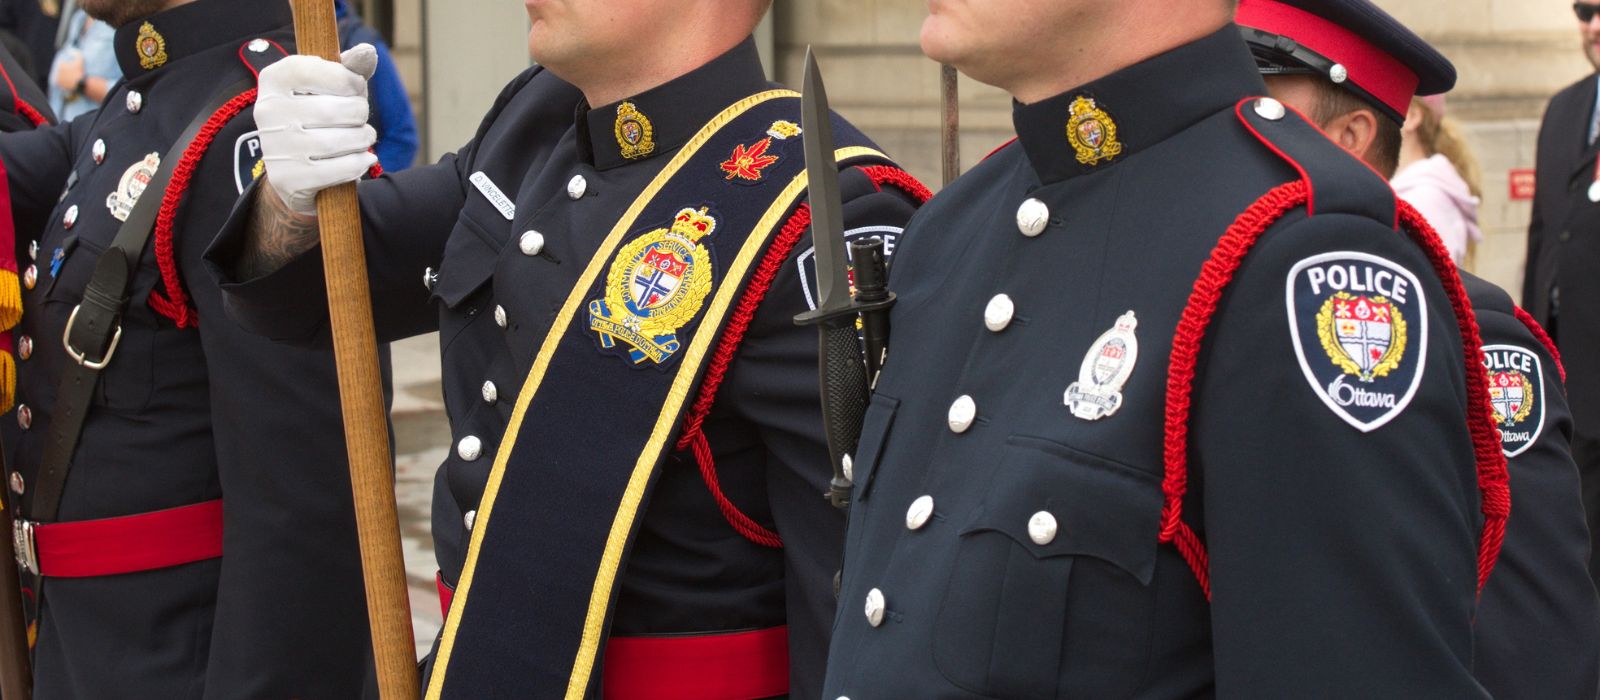 Members of the Ceremonial Guard standing at attention